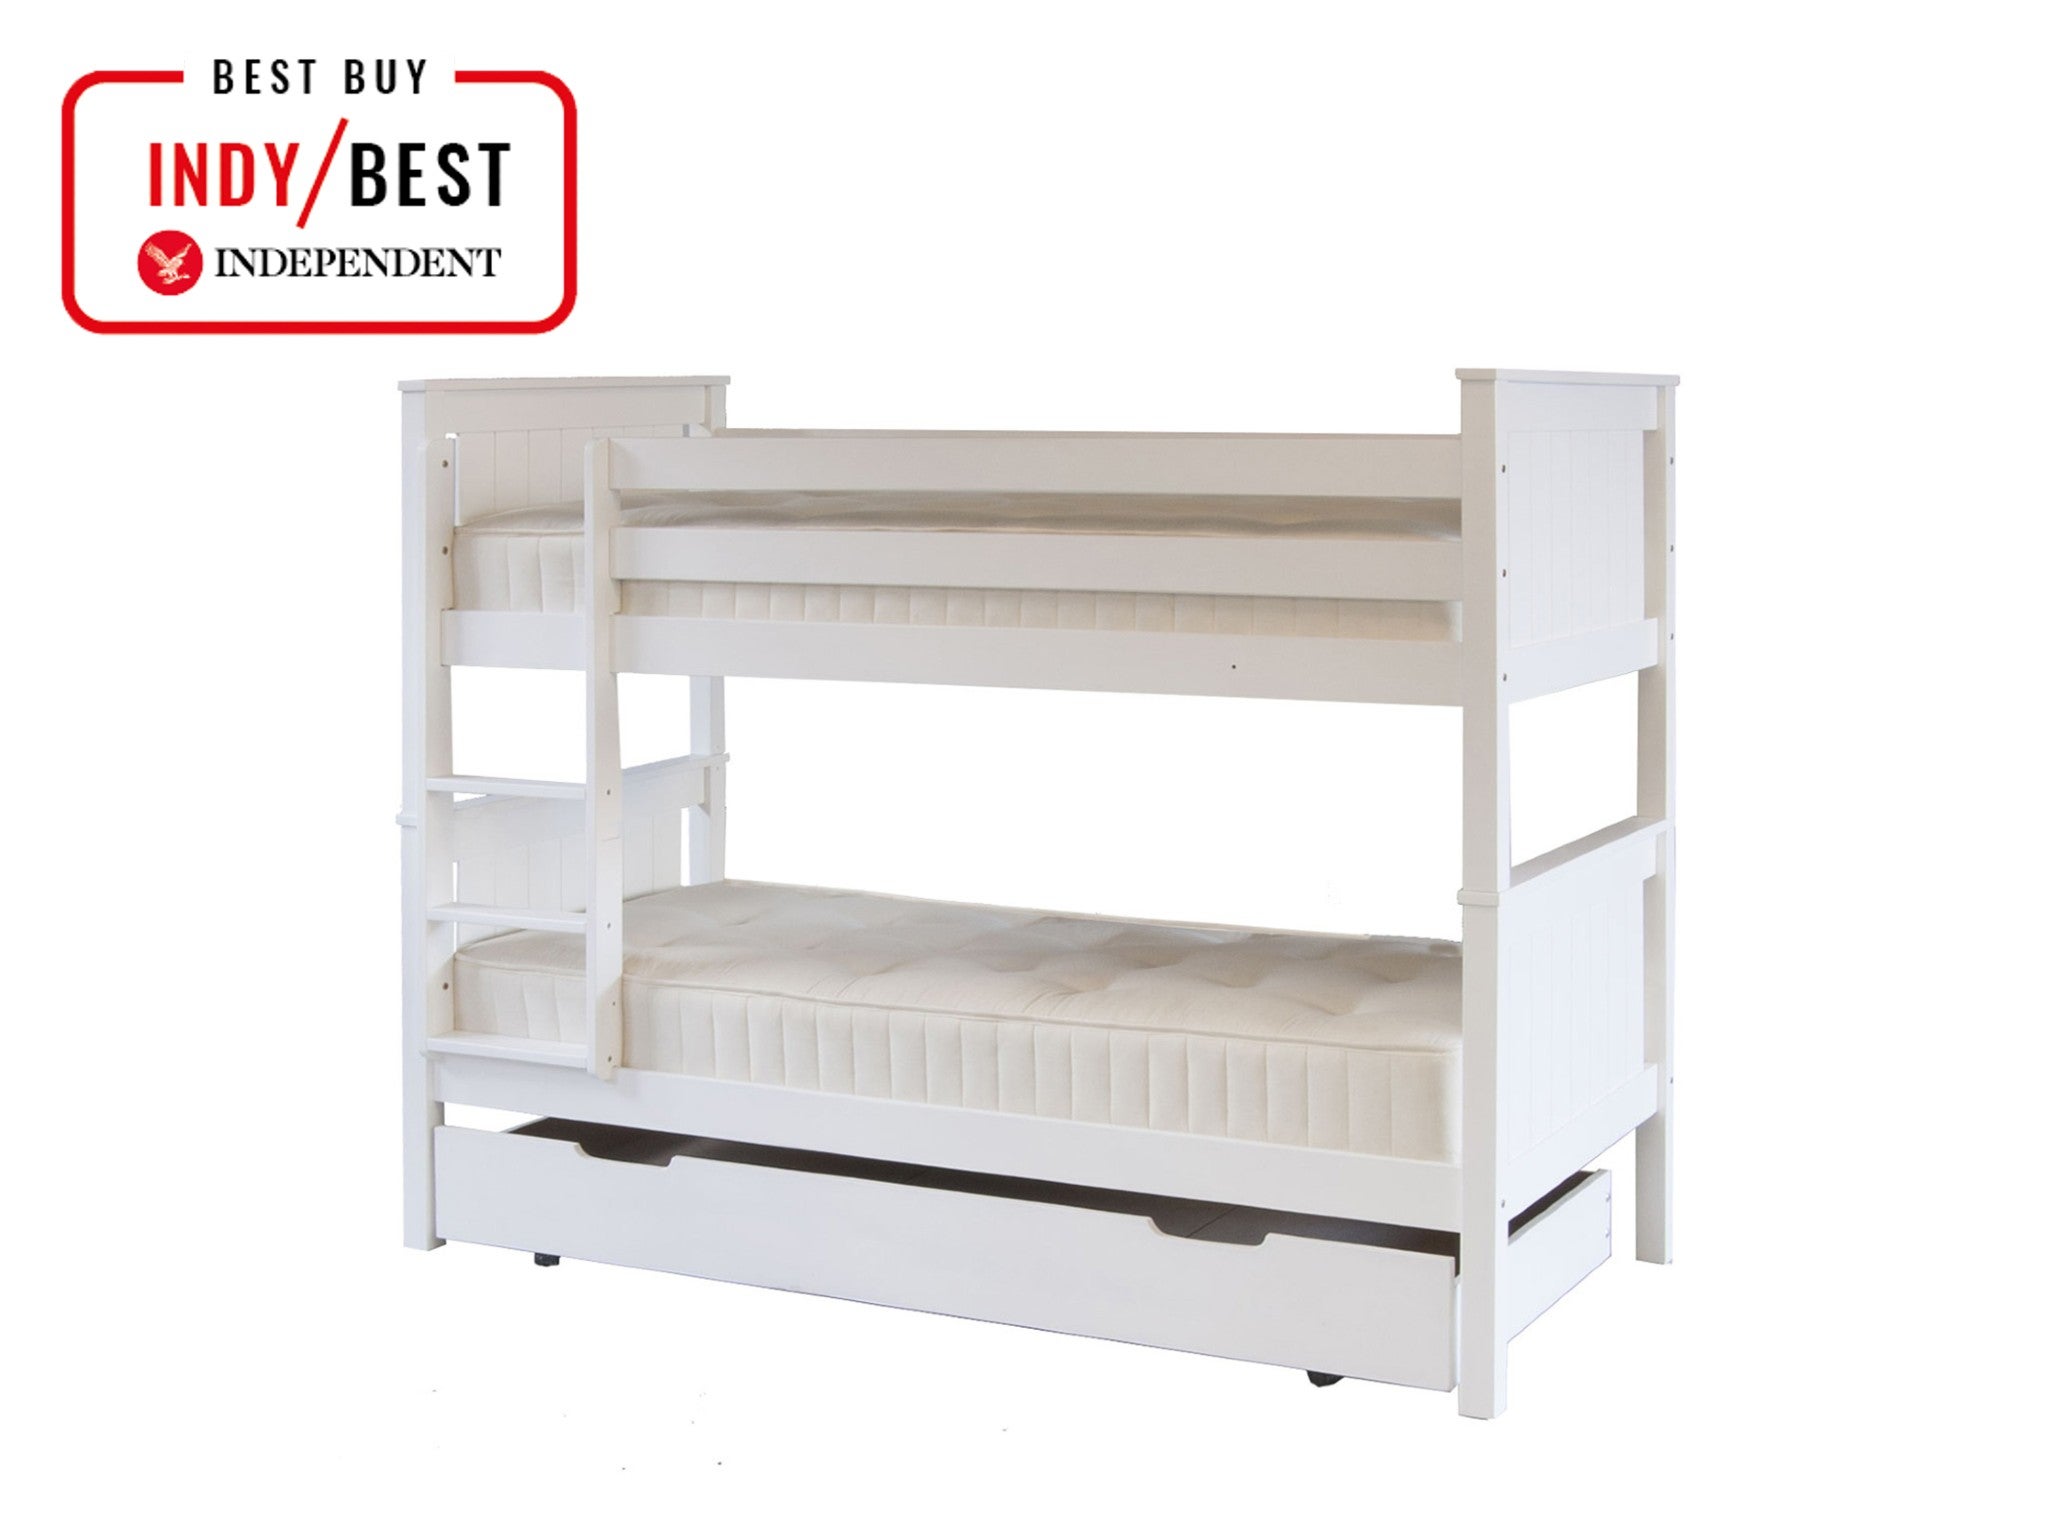 Little Folks Furniture classic beech bunk bed with storage and sleepover trundle indybest